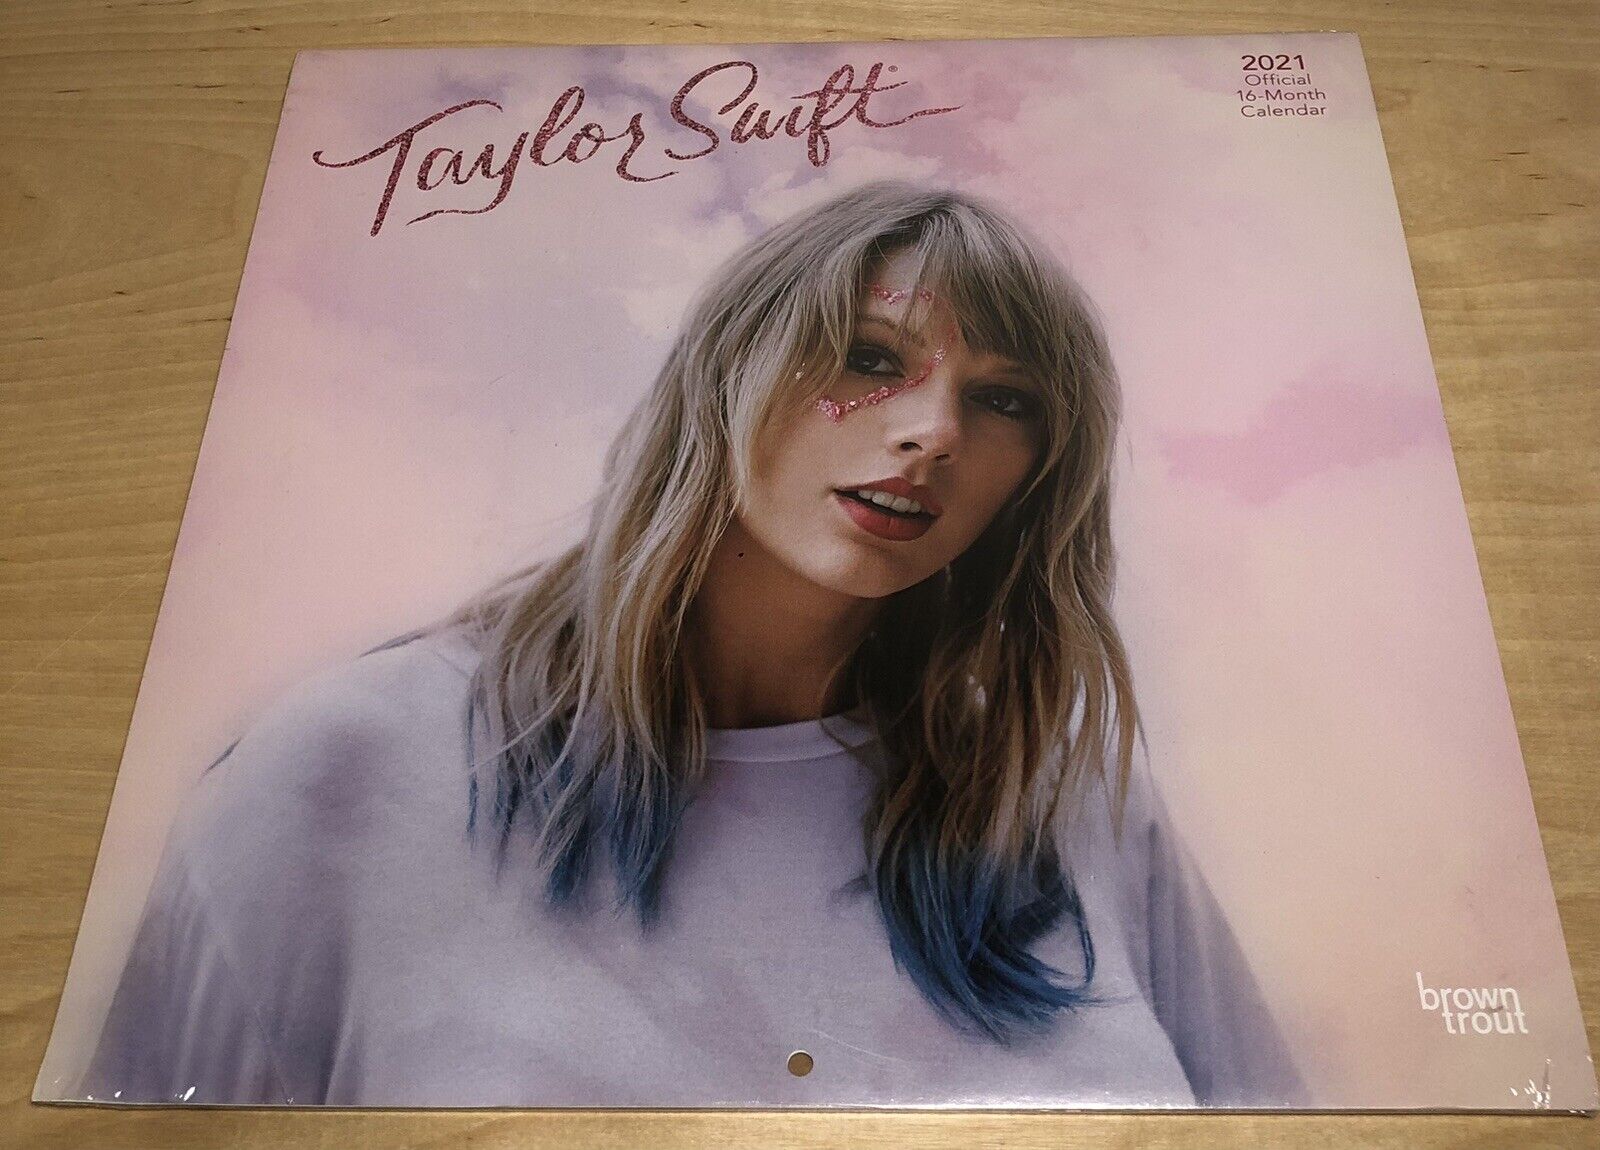 2021 Taylor Swift OFFICIAL 16 Mo Calendar by Brown Trout (BRAND NEW in Plastic)